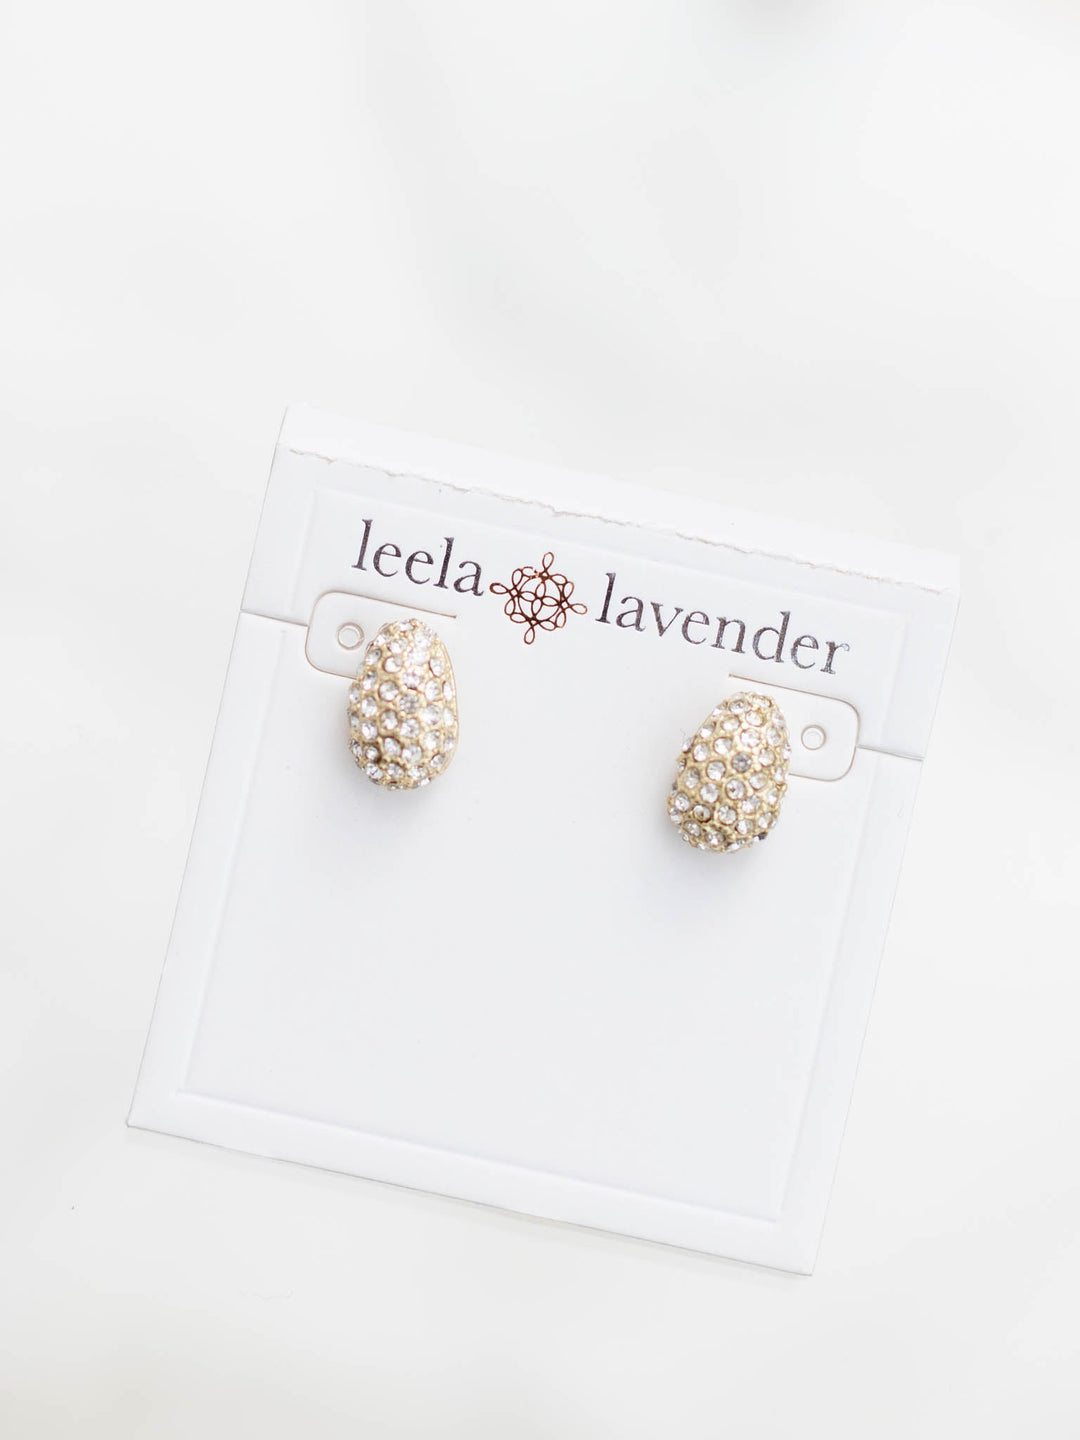 New Prospects-Pave Post Earrings - Leela and Lavender